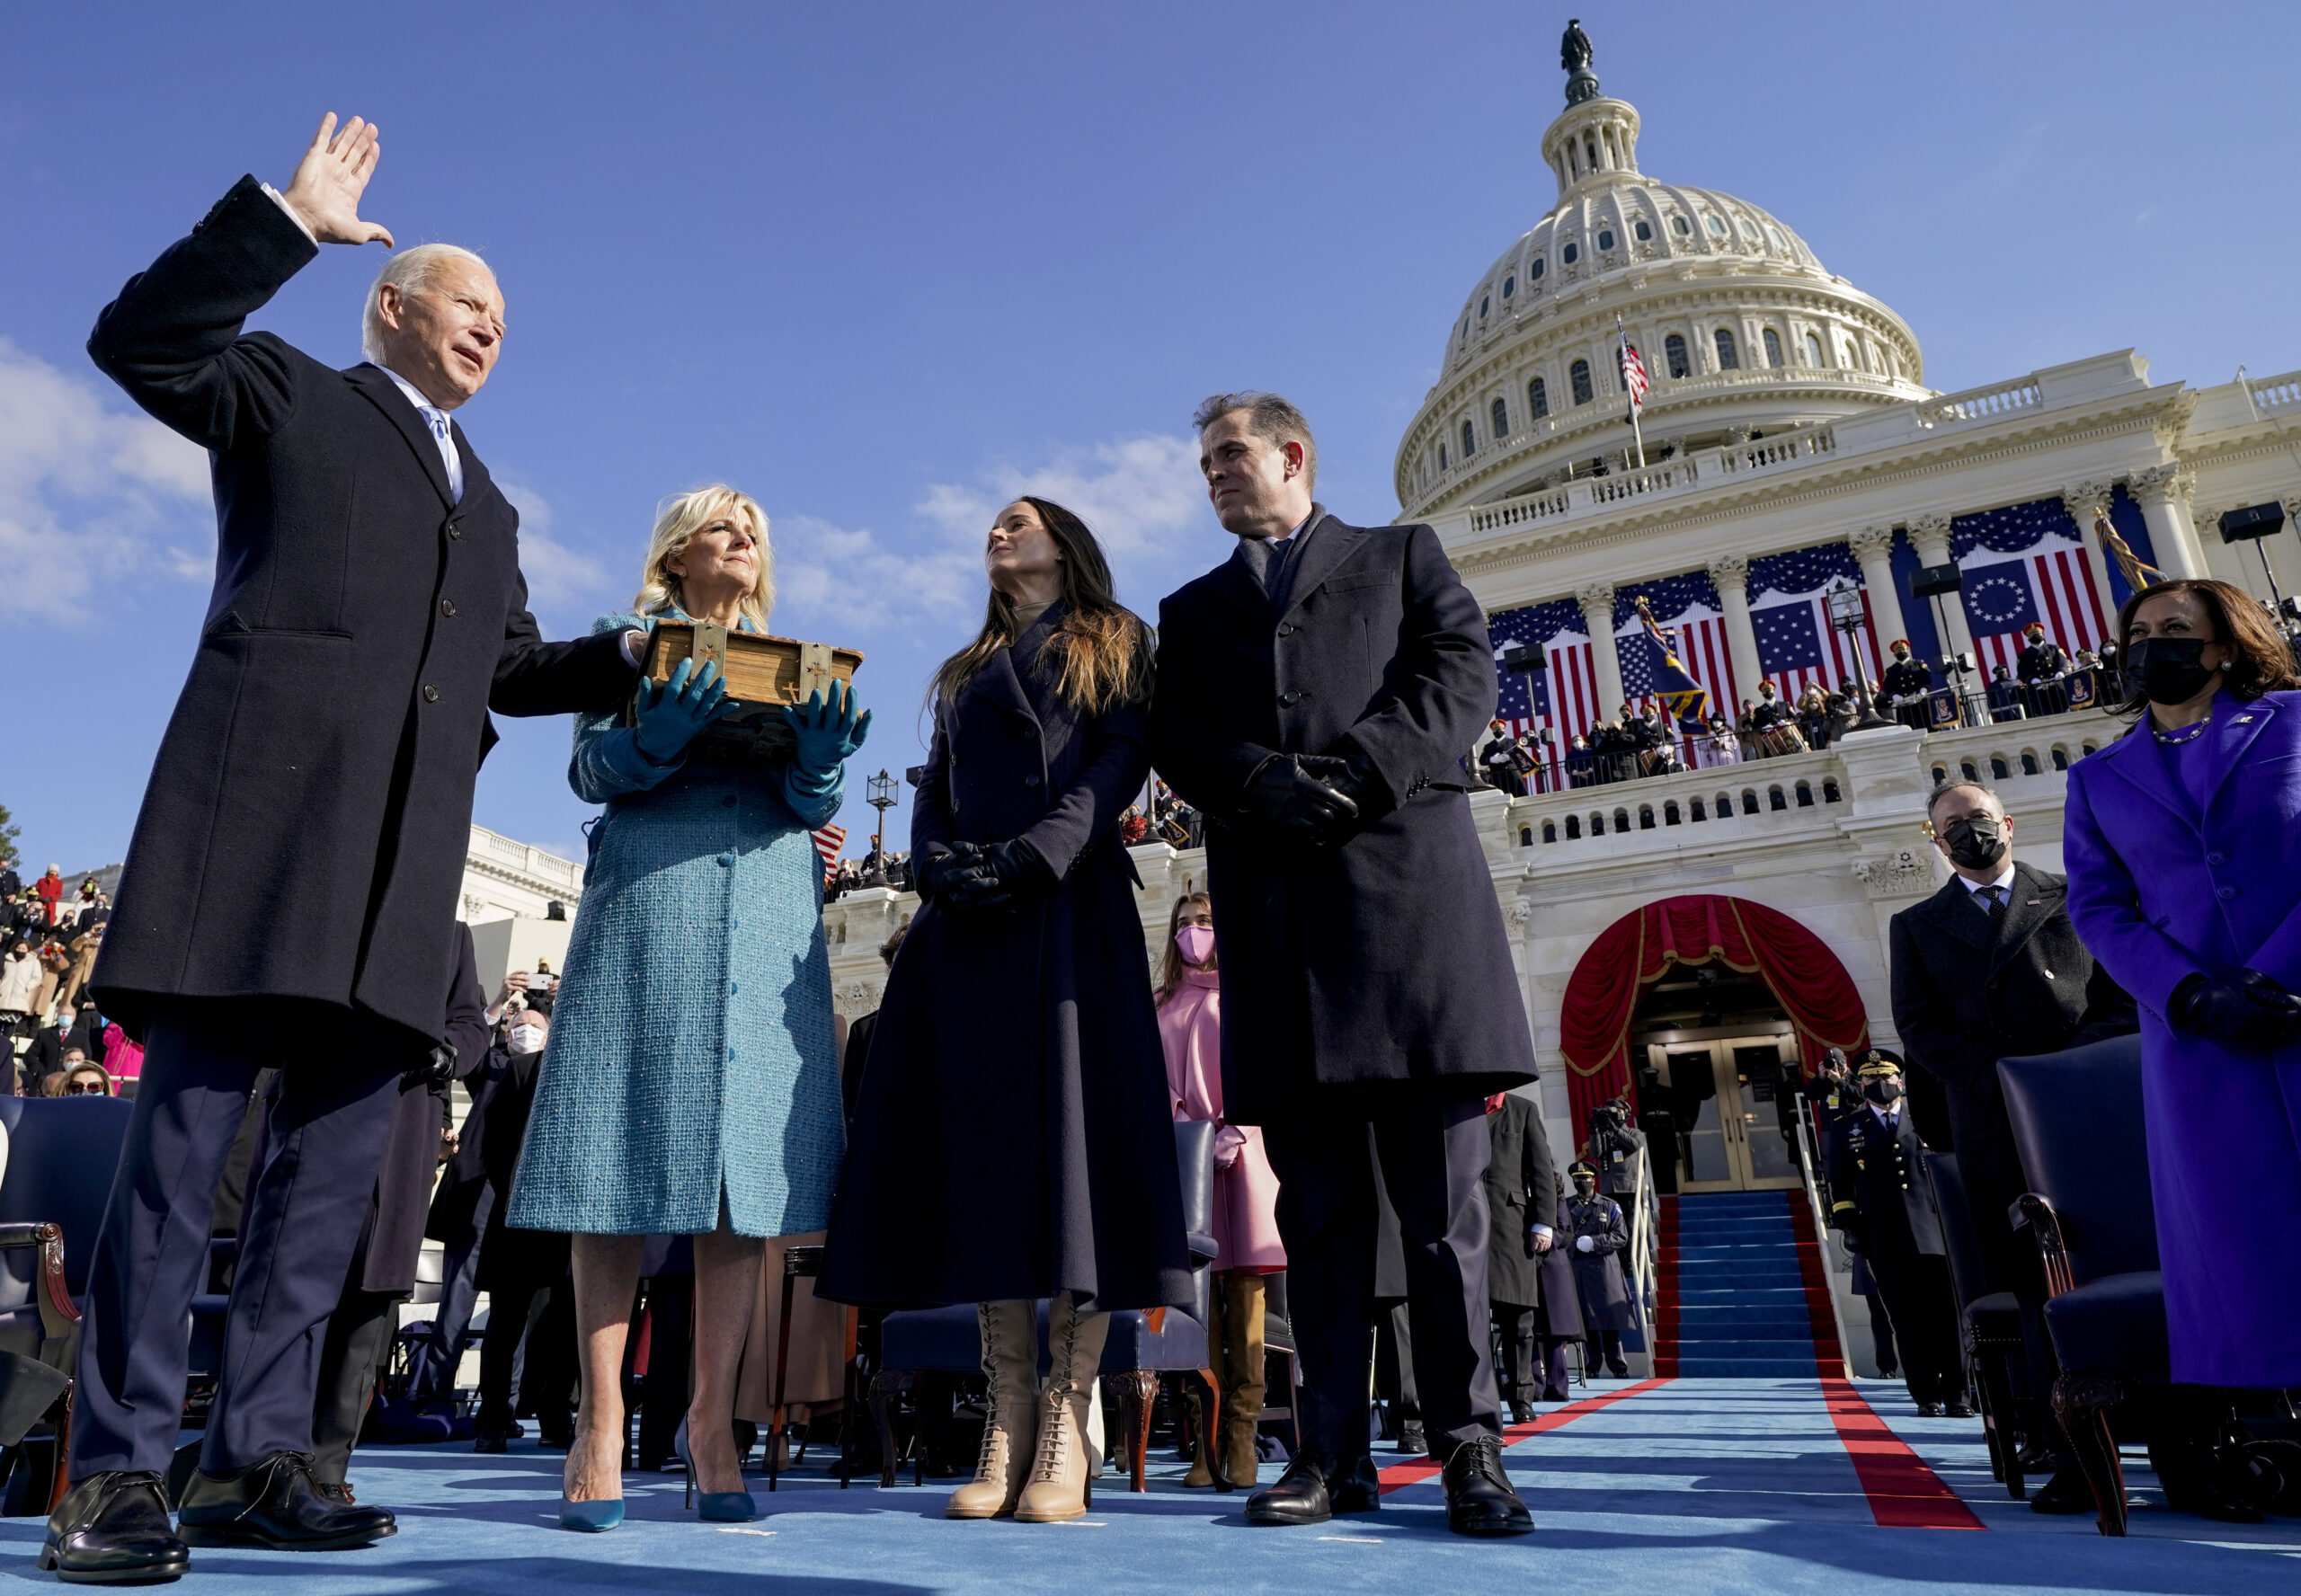 Joe Biden is sworn in as the 46th president of the United States by Chief Justice John Roberts as Jill Biden holds the Bible during the 59th Presidential Inauguration at the U.S. Capitol in Washington, Wednesday, Jan. 20, 2021, as their children Ashley and Hunter watch.(AP Photo/Andrew Harnik, Pool)